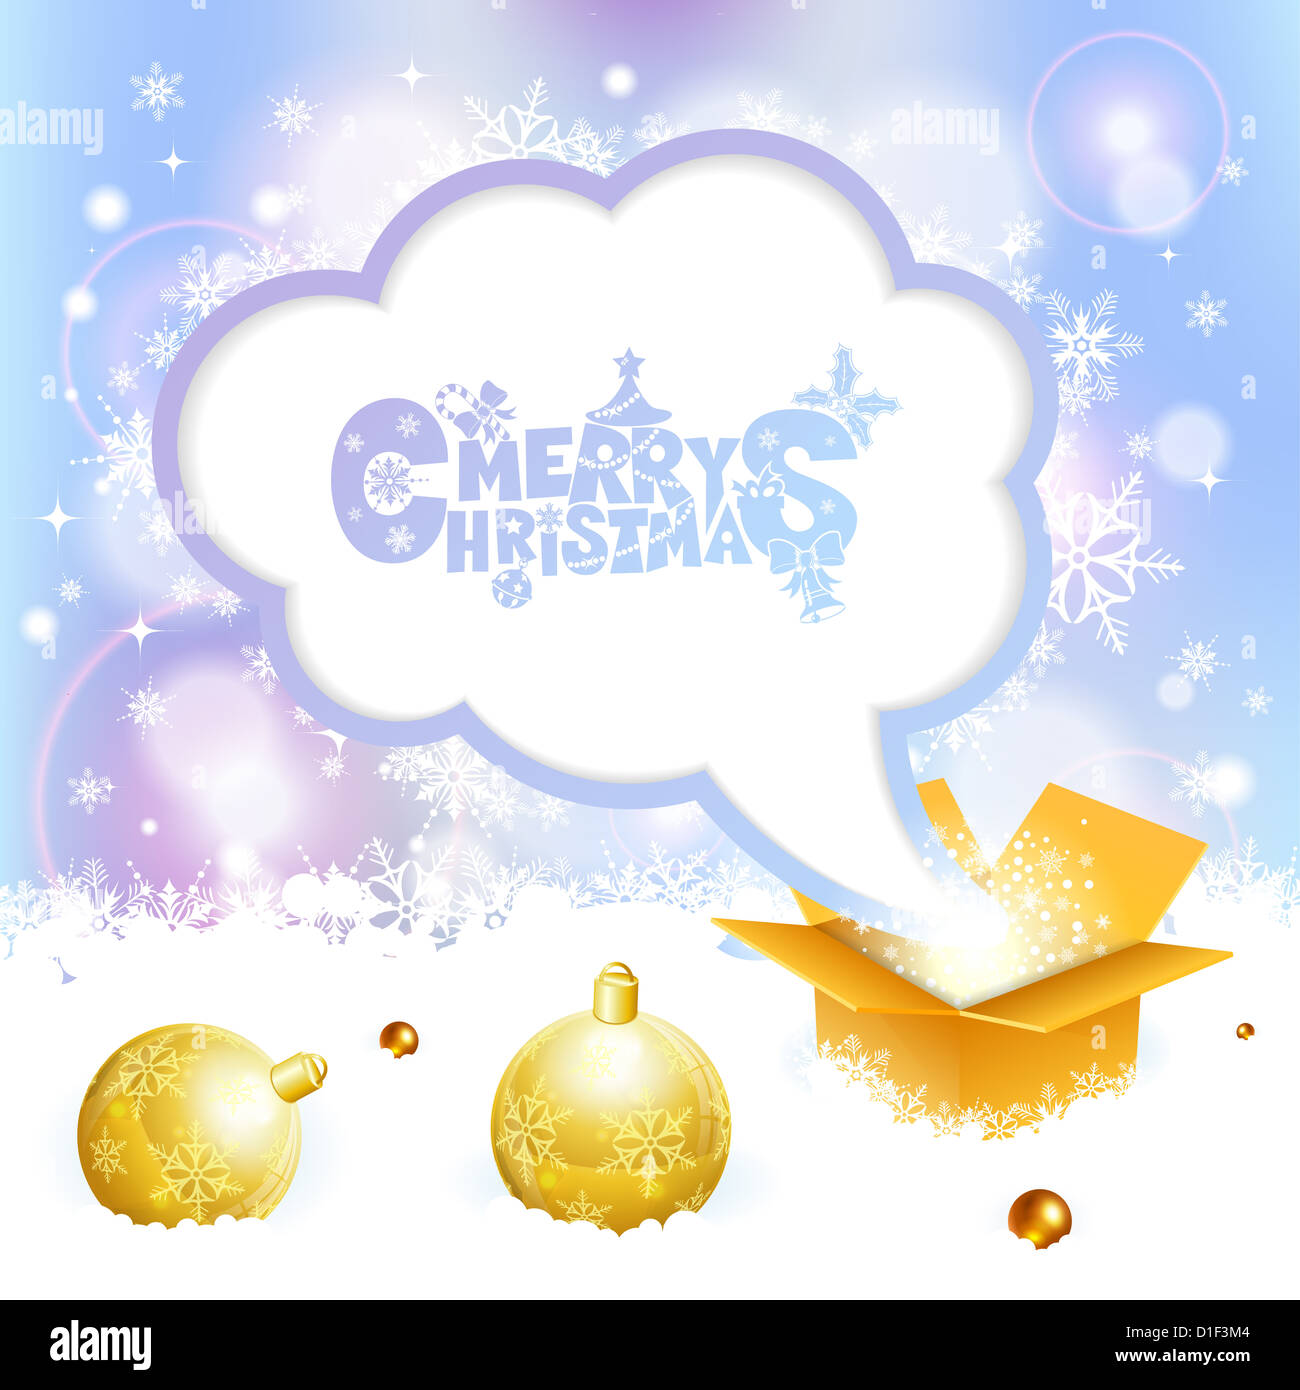 Christmas Background with Gift Box and Speech Bubble, illustration Stock Photo